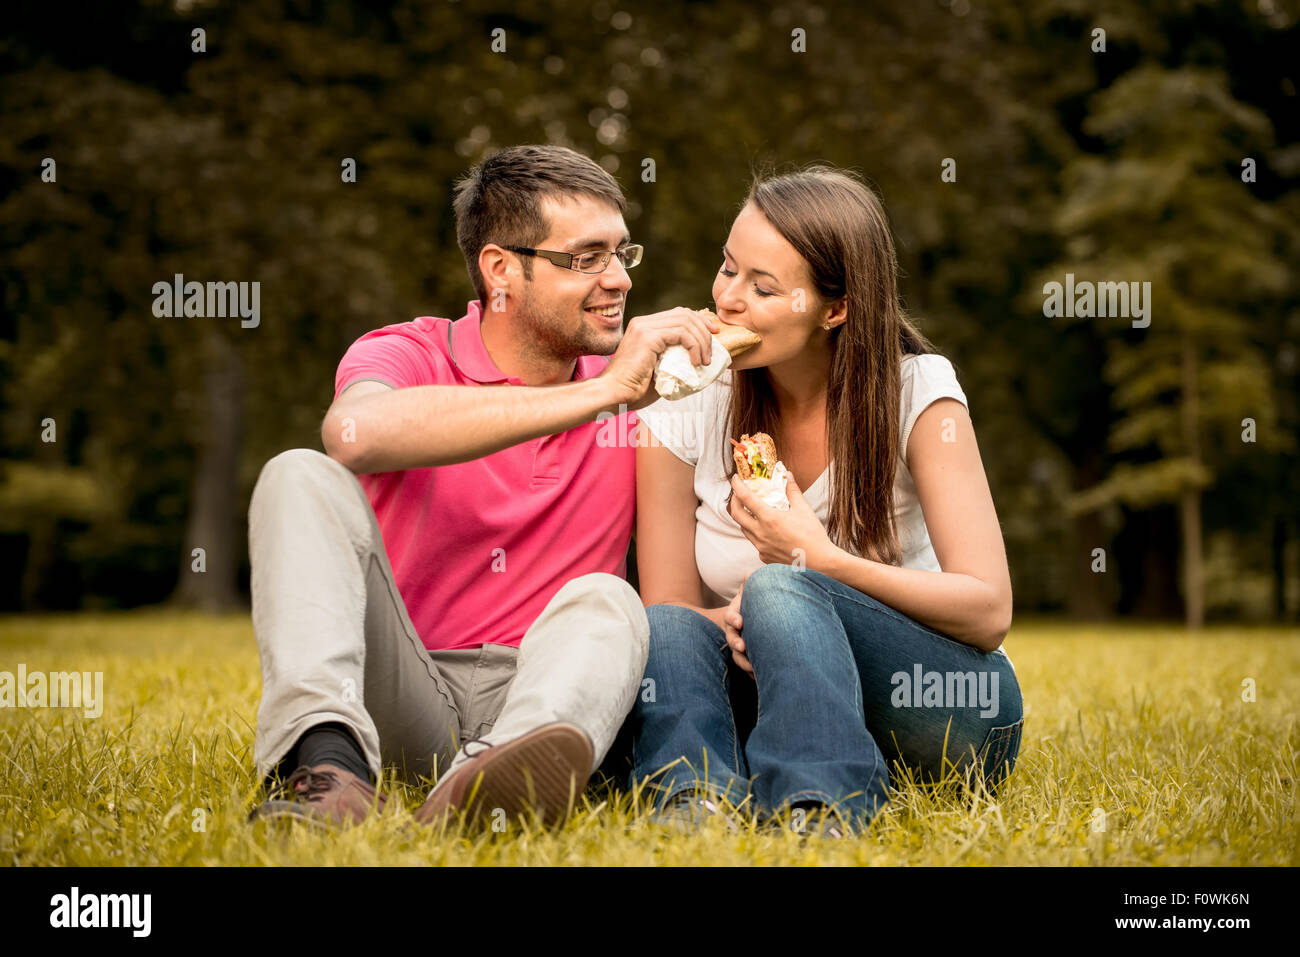 Couple eating and sharing sandwich outdoor in nature Stock Photo